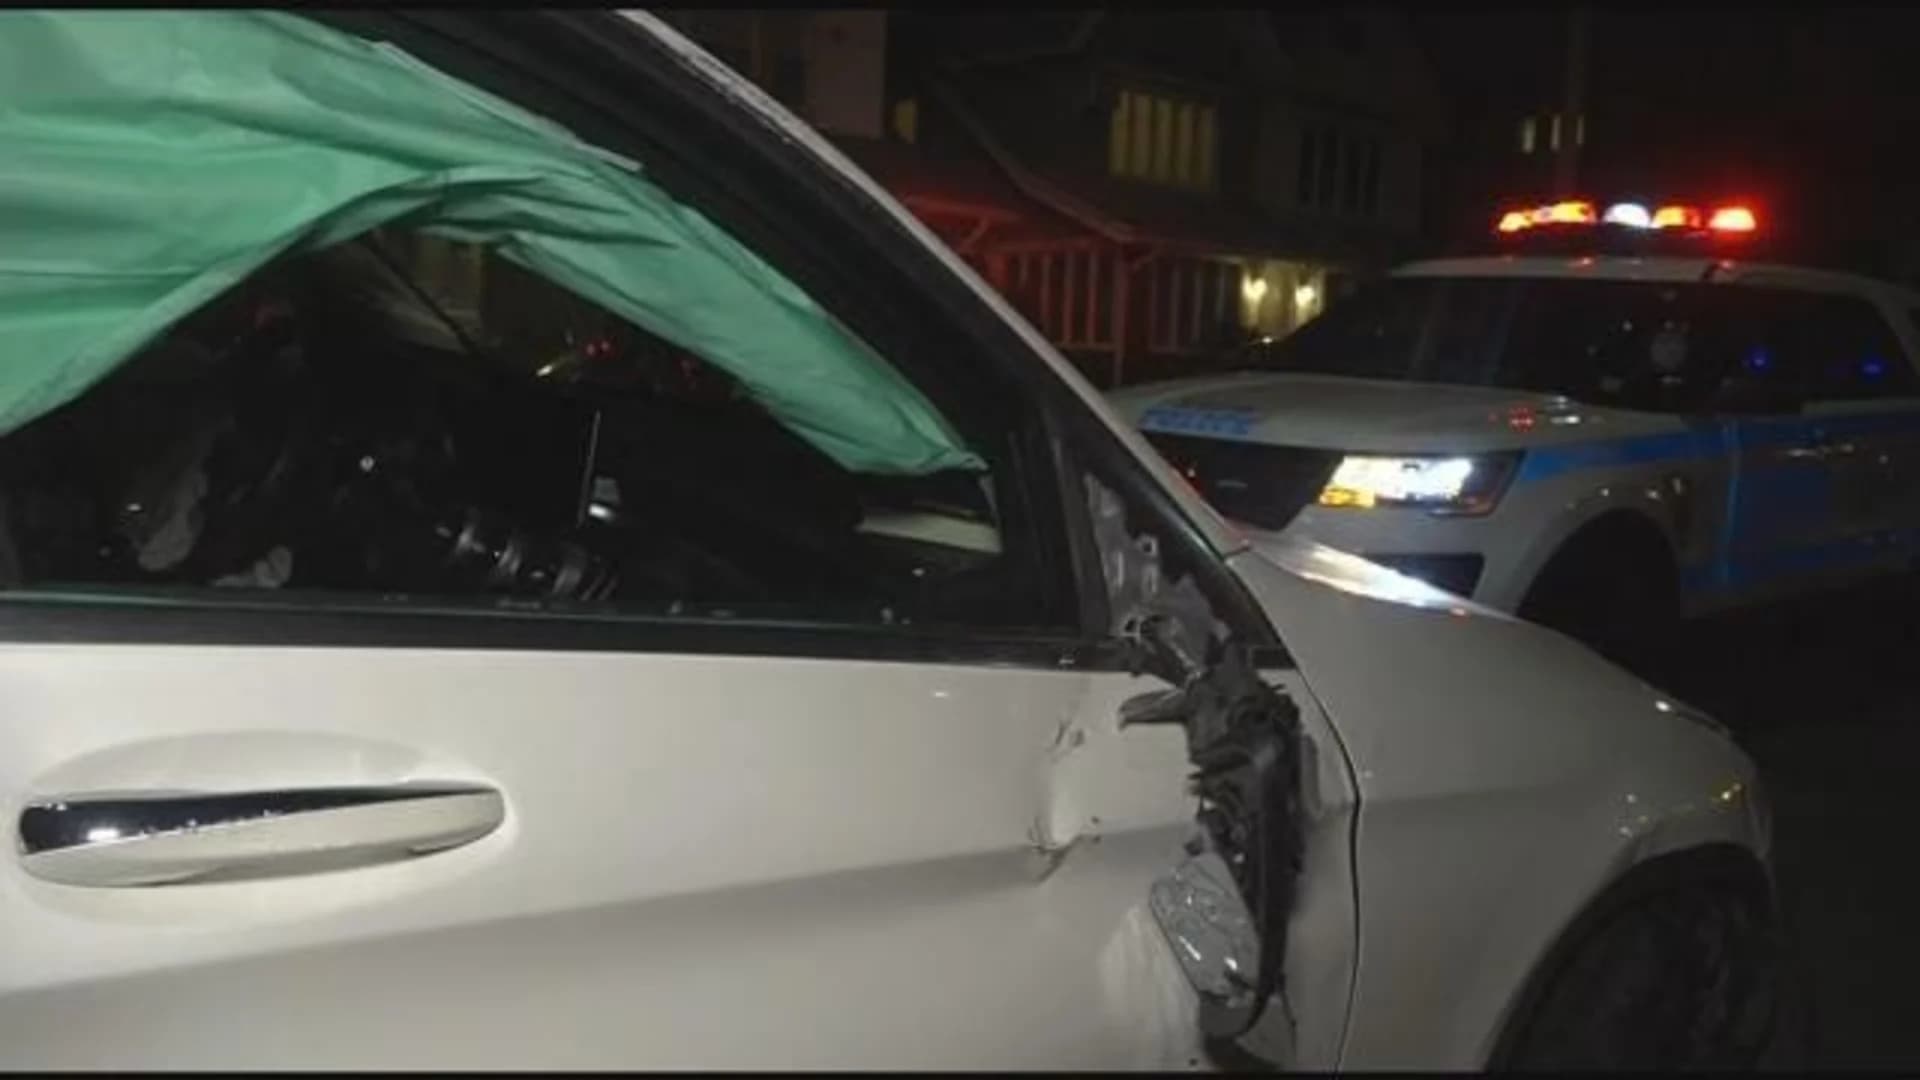 Staten Island man arrested for DWI after crashing into several cars in Midwood